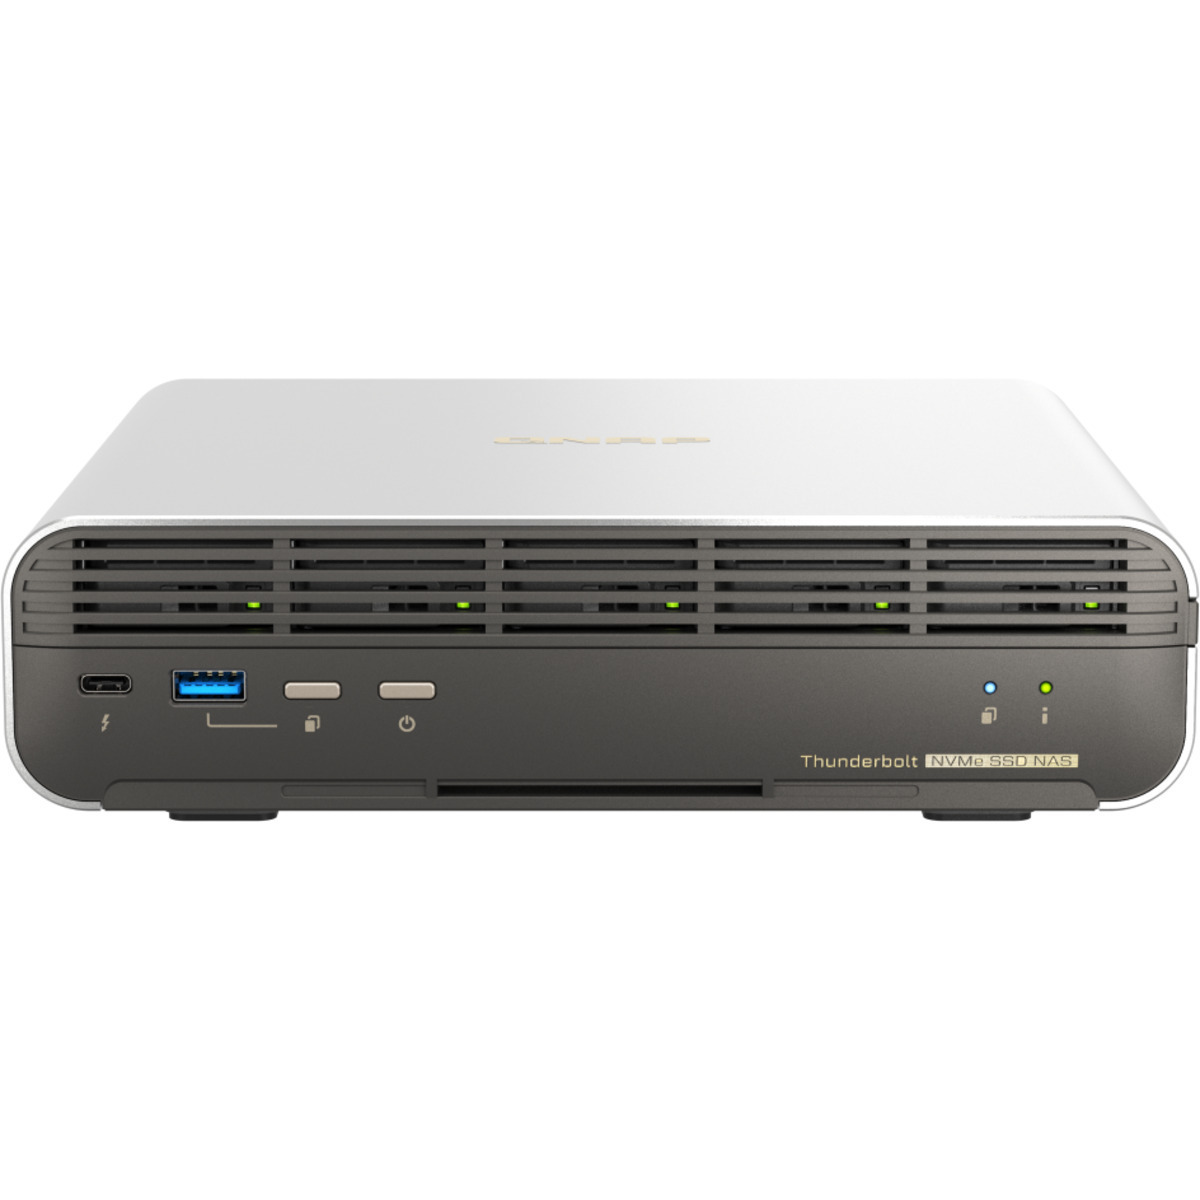 QNAP TBS-h574TX Core i3 Thunderbolt 4 2.5tb 5-Bay Desktop Multimedia / Power User / Business DAS-NAS - Combo Direct + Network Storage Device 5x500gb Samsung 970 EVO PLUS MZ-V7S500BW  3500/2300MB/s M.2 2280 NVMe SSD CONSUMER Class Drives Installed - Burn-In Tested TBS-h574TX Core i3 Thunderbolt 4